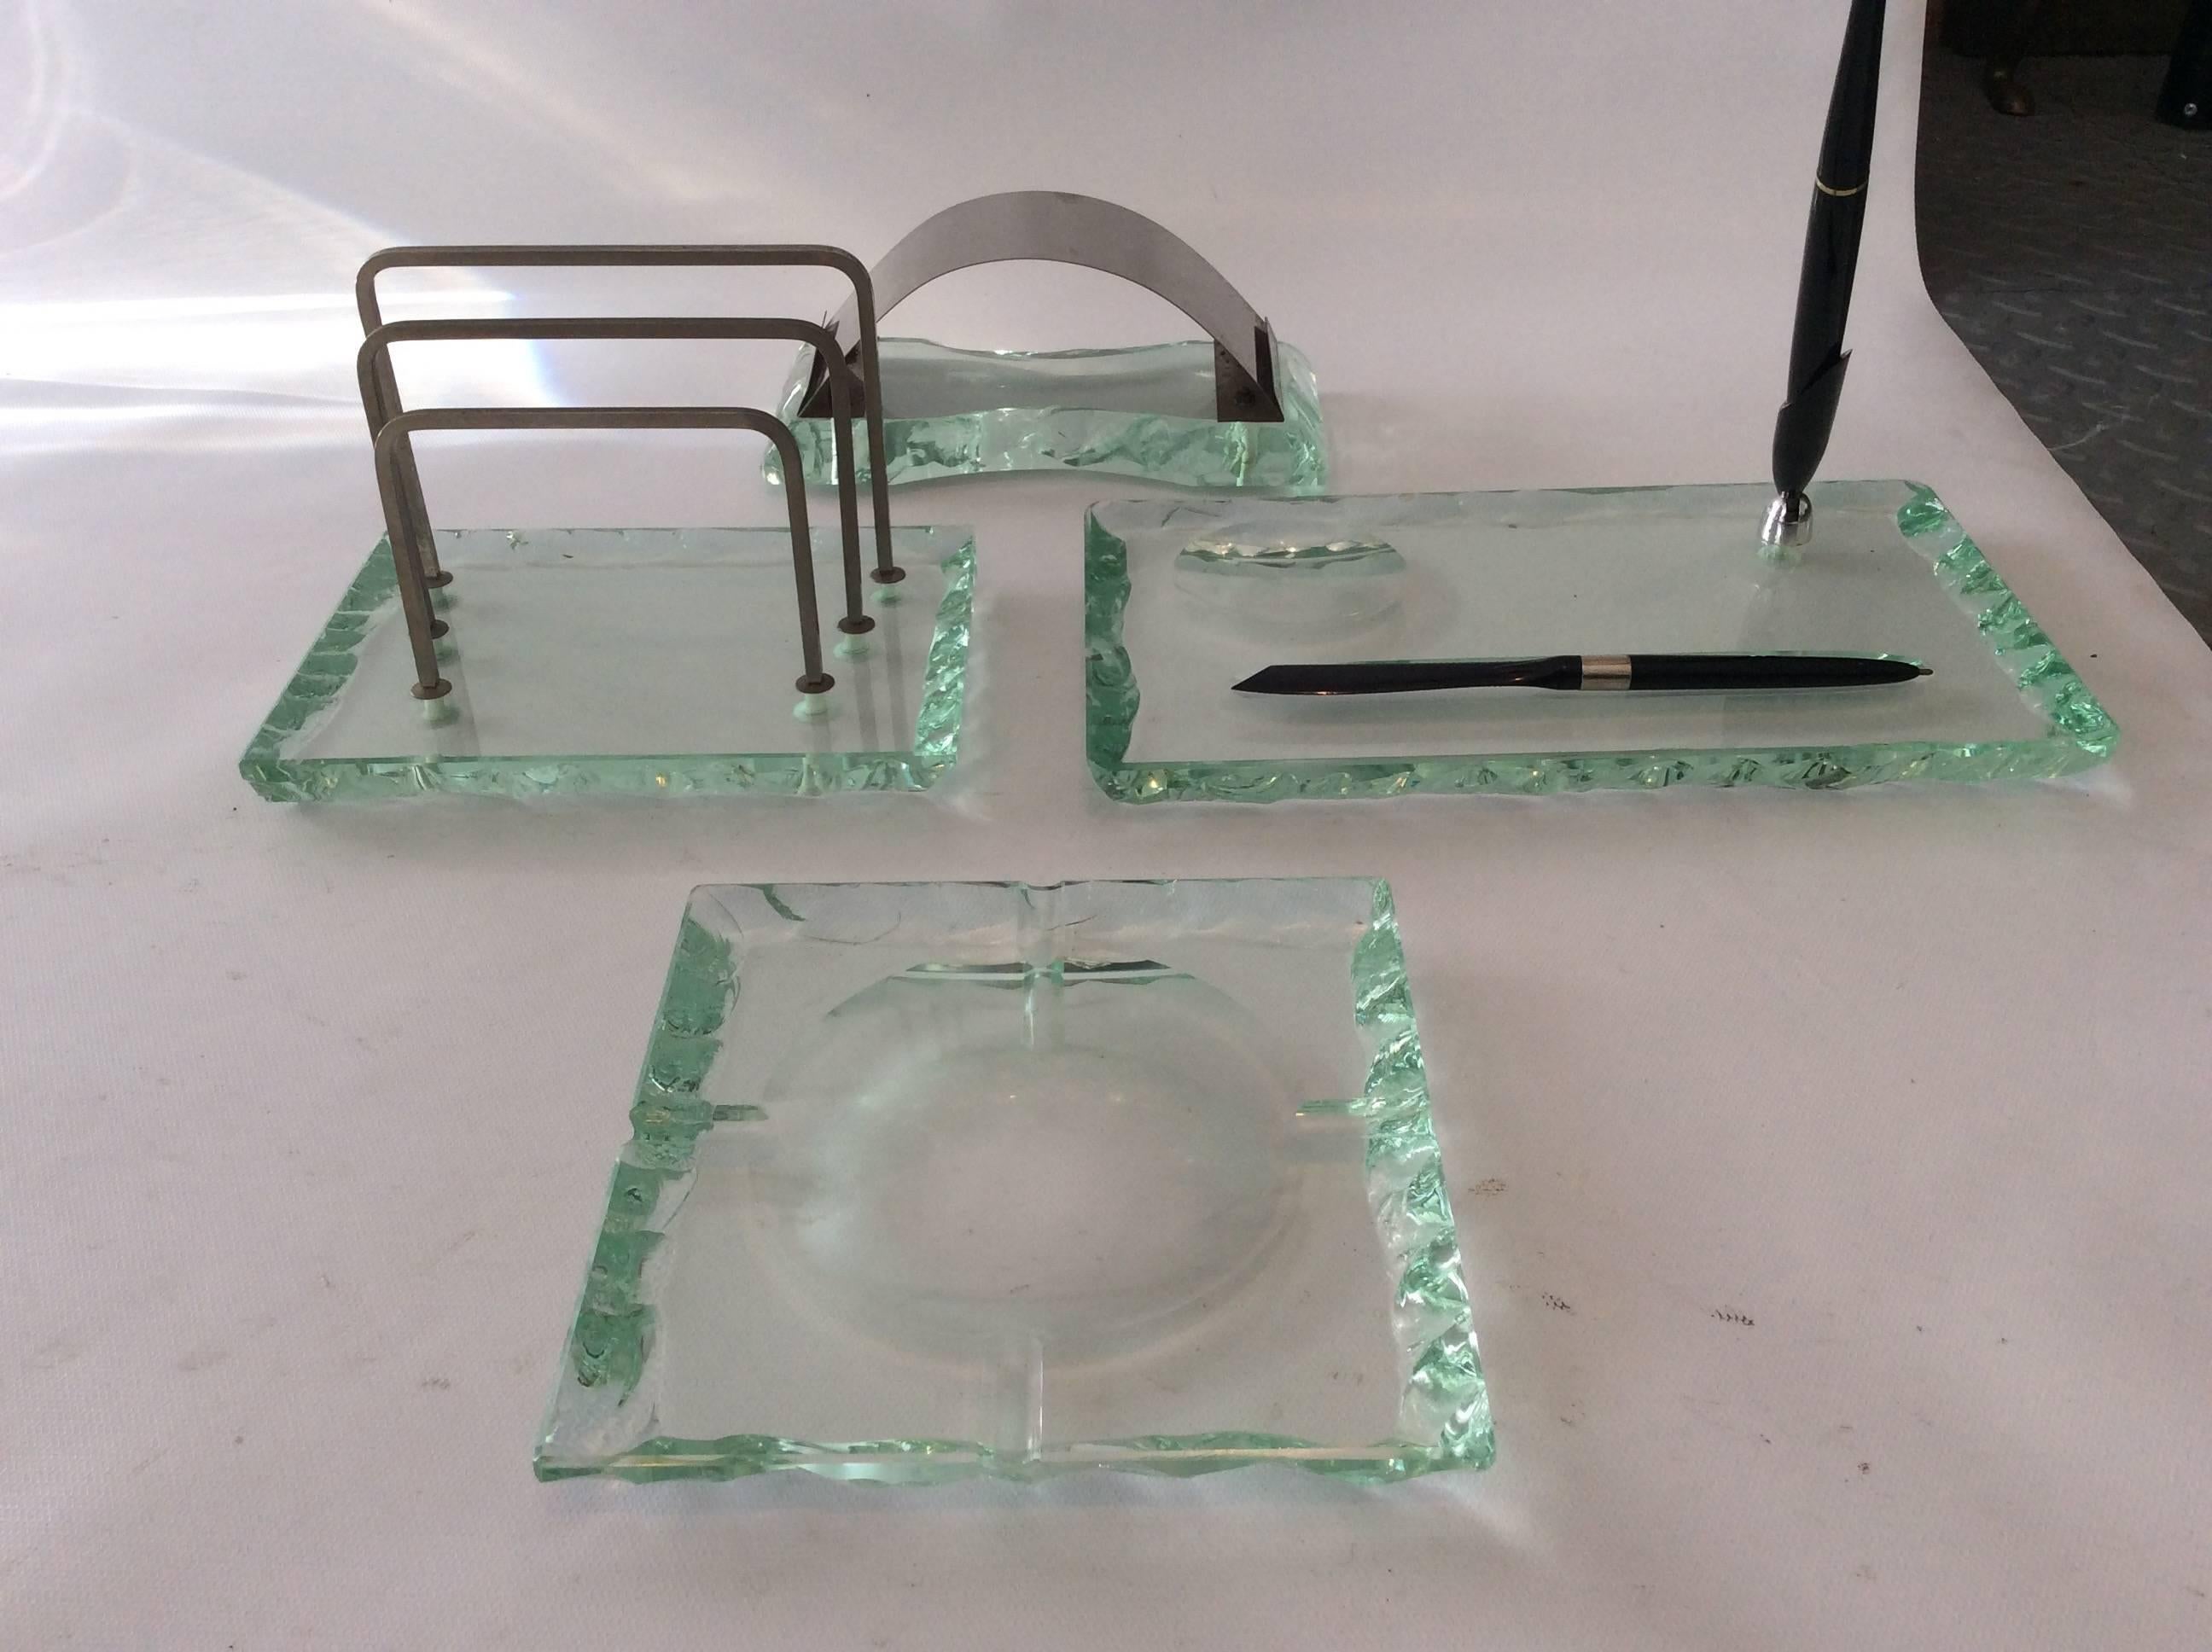 Desk set produced by Fontana Arte, Italy 1950s. The set comprises a letter holder, pen holder, ashtray and blotter.